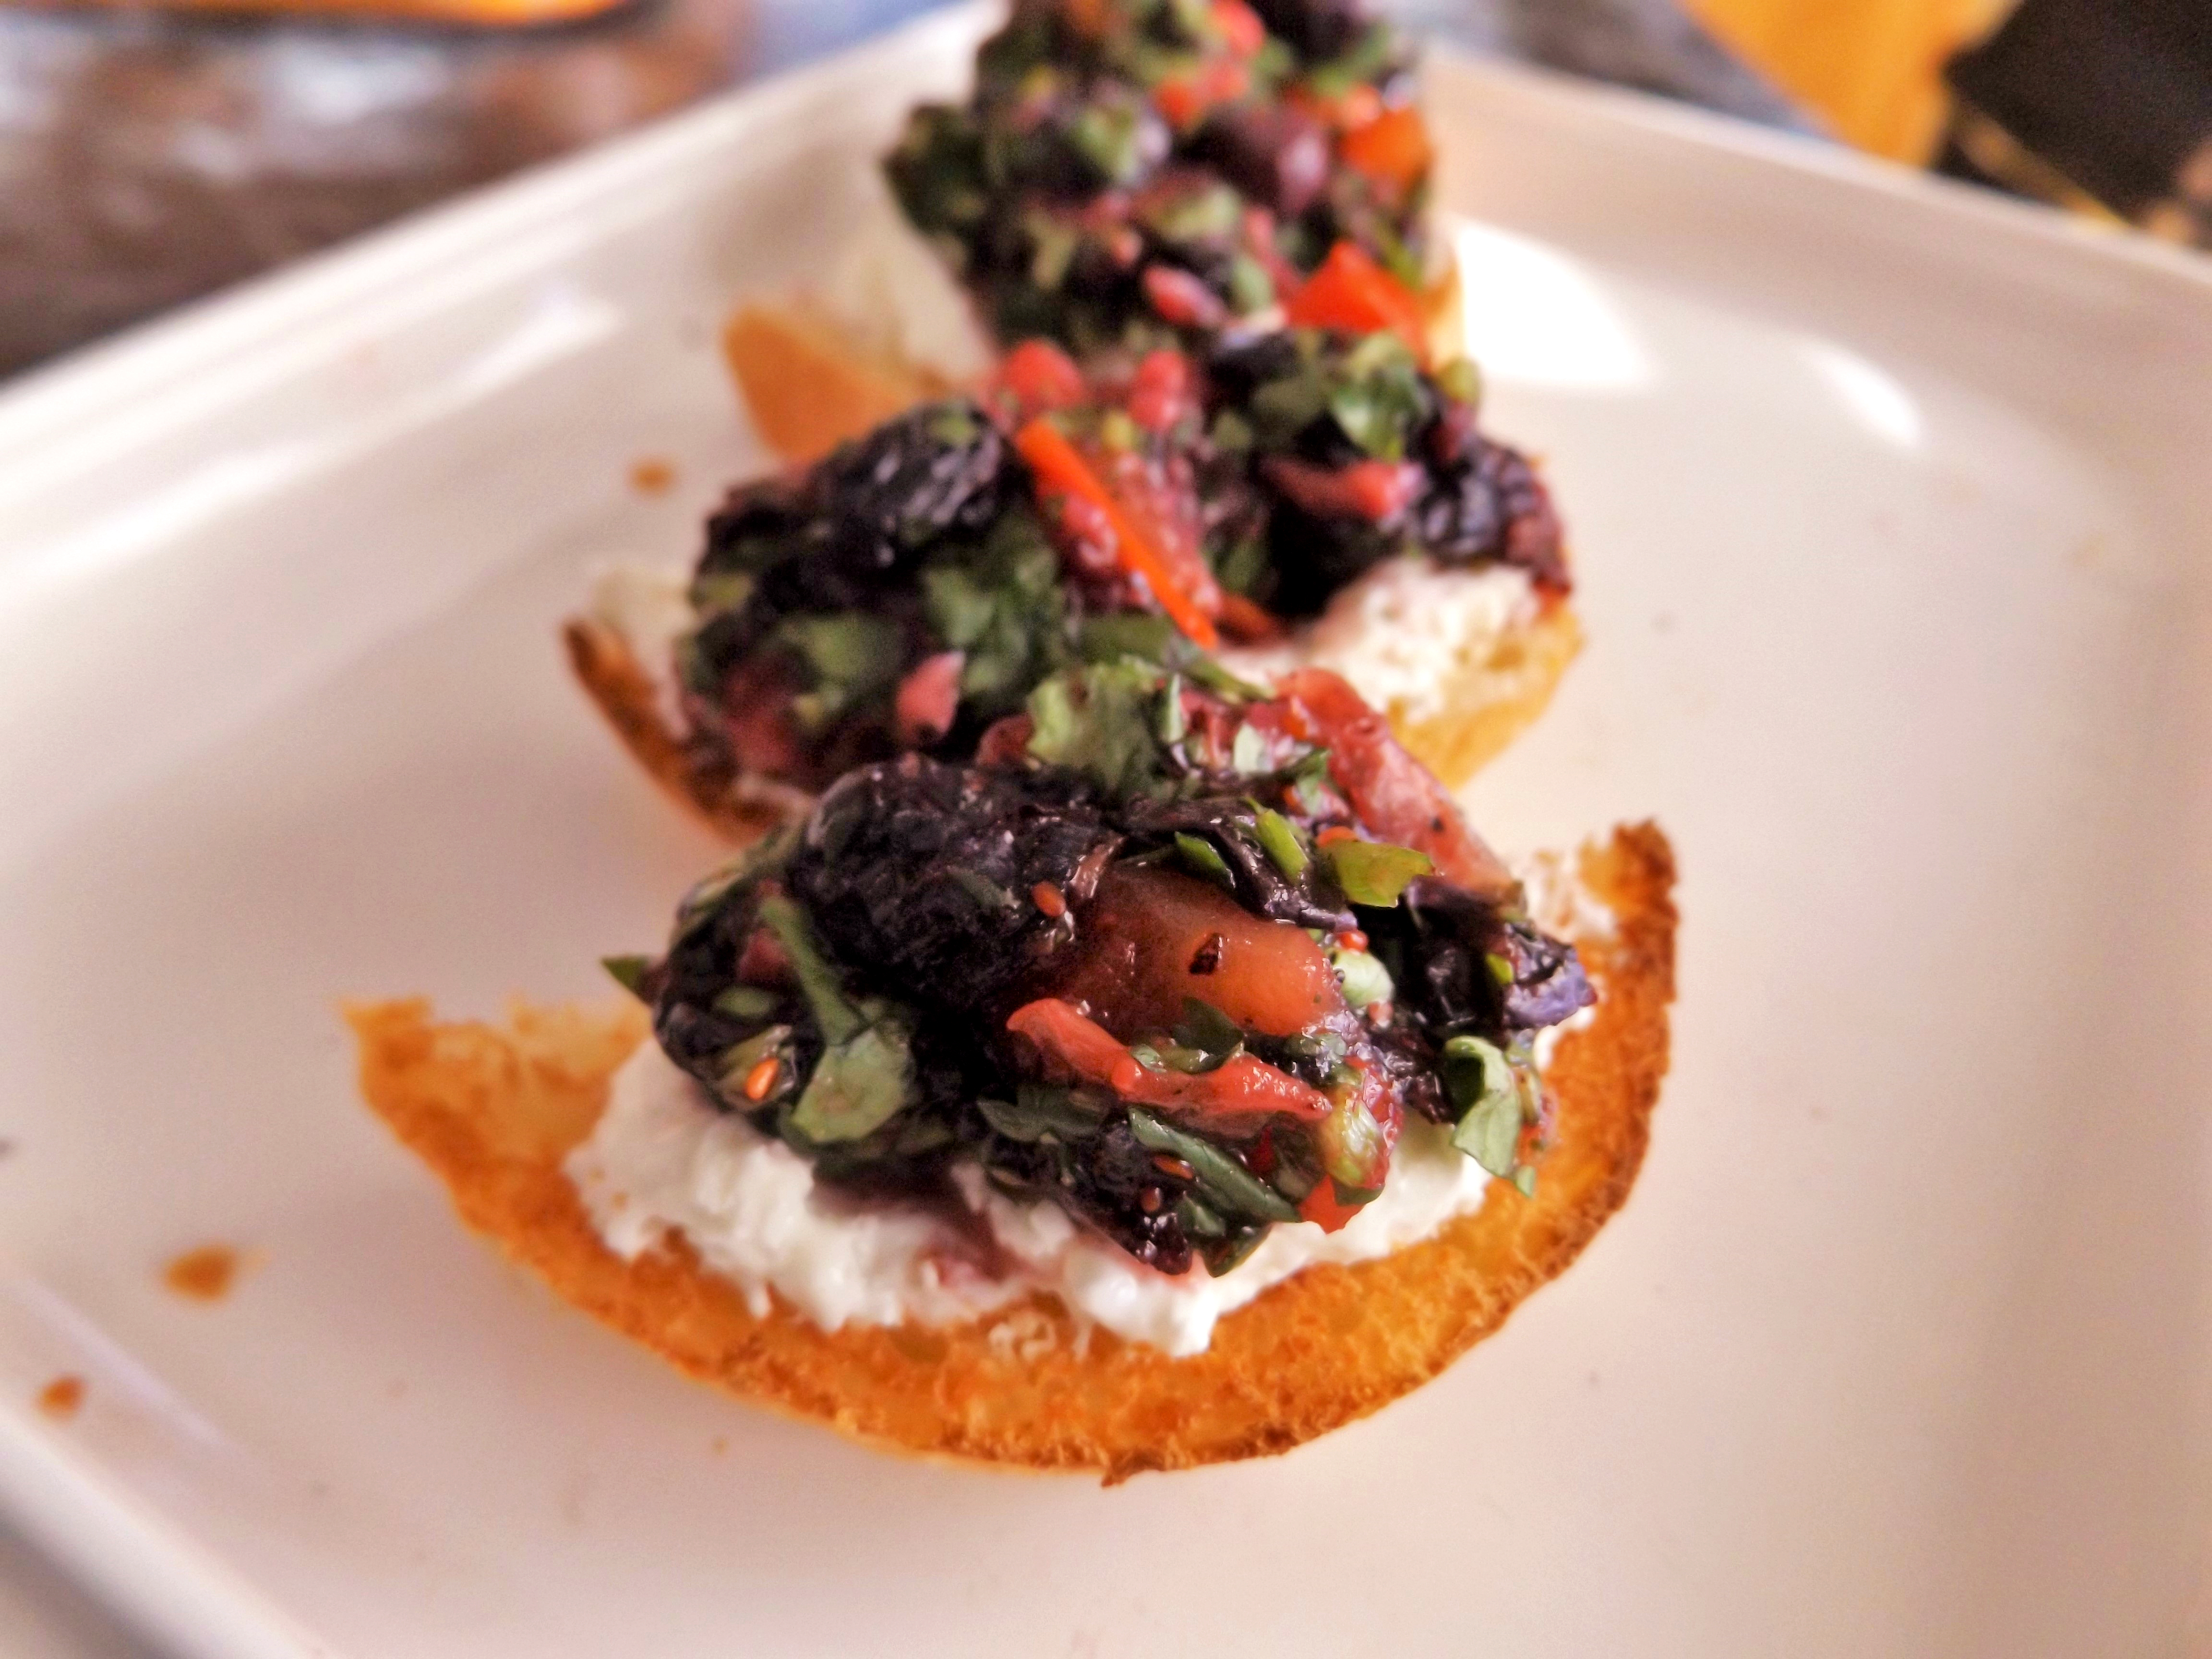 From Jim Bailey, The Yankee Chef, this recipe for Salsa Brava, which literally means “wild salsa!” He's taken that description to the next level and used wild blueberries in this deliciously piquant spreadable, yet dip-able, salsa.